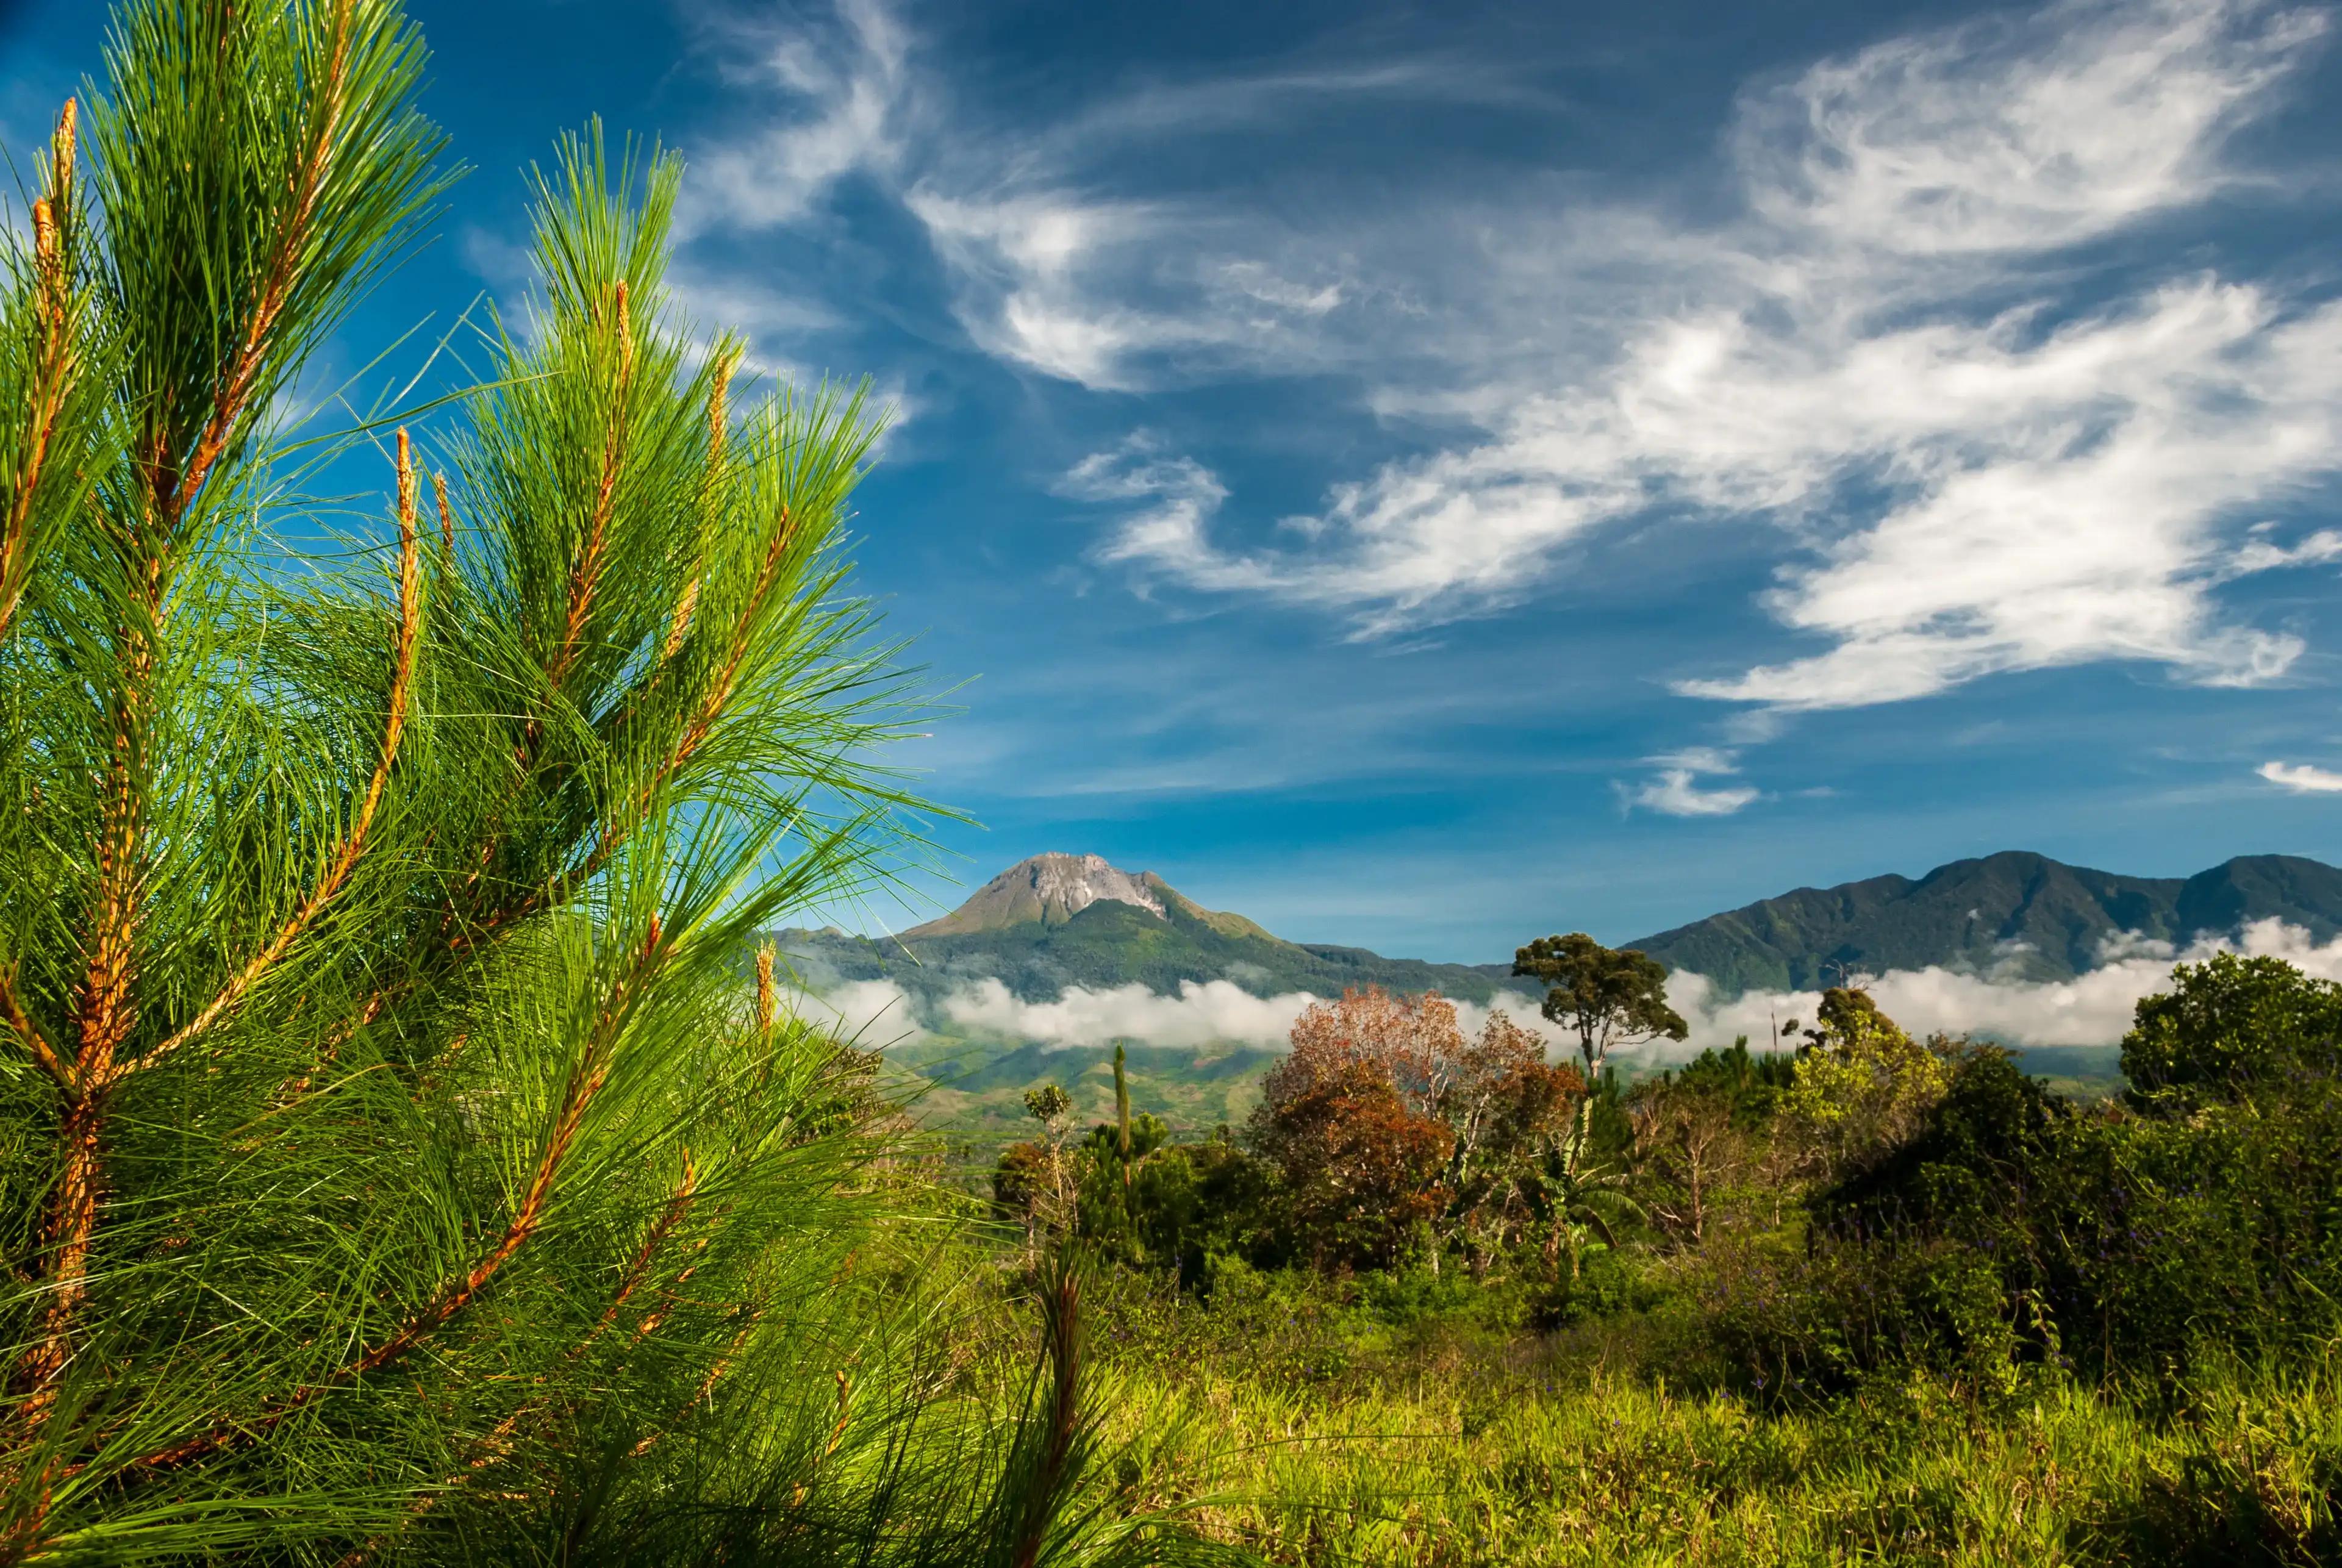 Upland shot of Mount Apo in Davao Philippines with green lush pine forest under saturated blue and cloudy sky one beautiful warm morning 